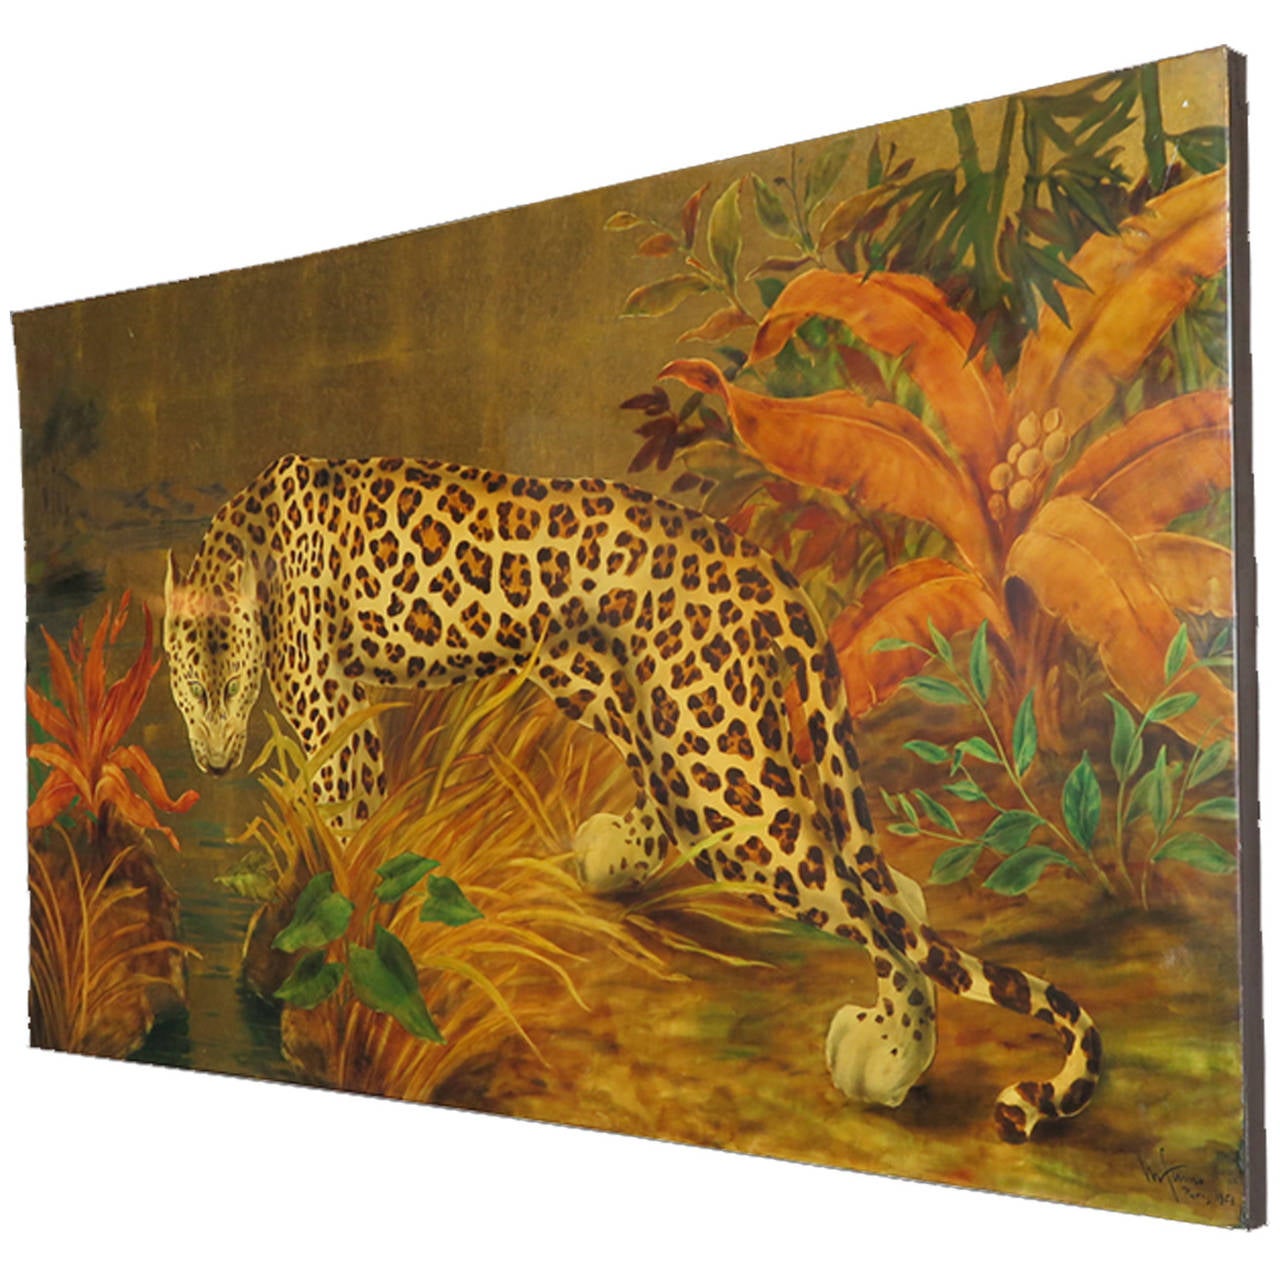 Rectangular wooden lacquer panel displaying a Leopard in the Savannah with gold leaf background. Attributed to Jacques Cartier (Grandson of founder of Cartier) from France 1953. the piece is titled 